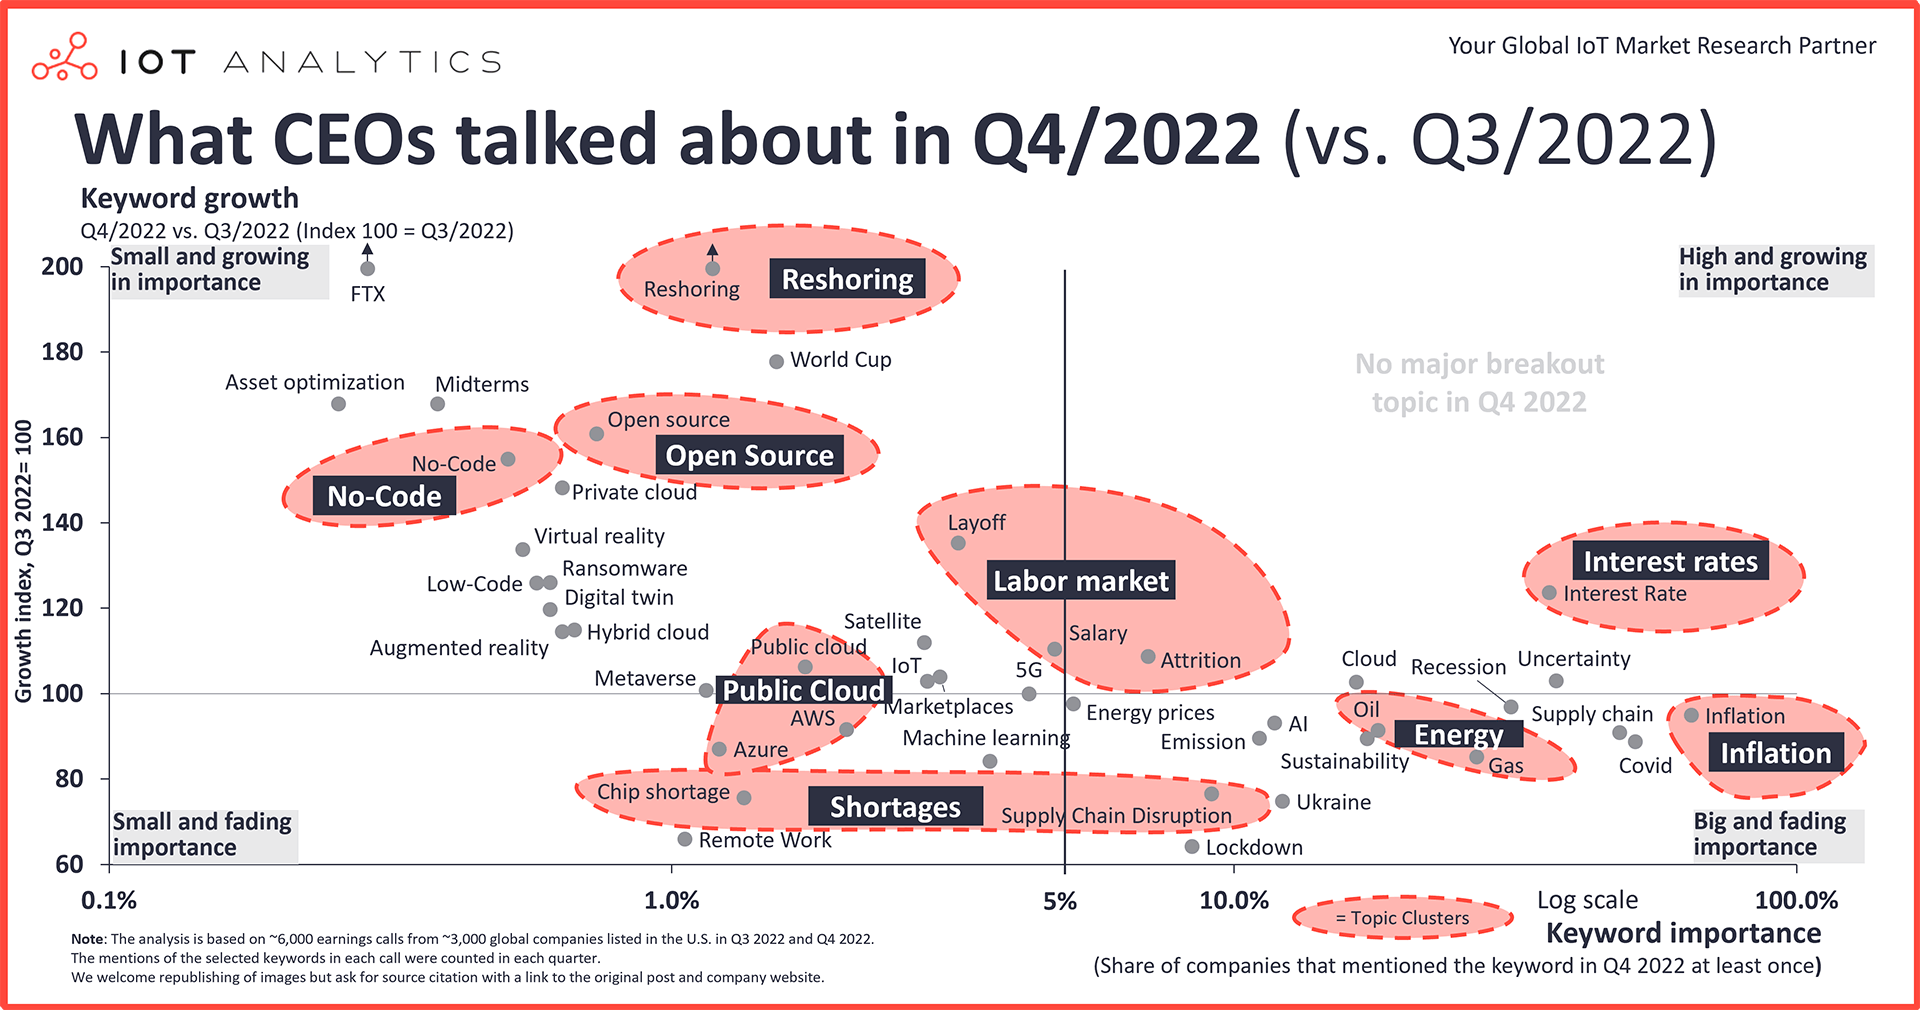 What CEOs talked about Q4 2022 vs Q3 2022